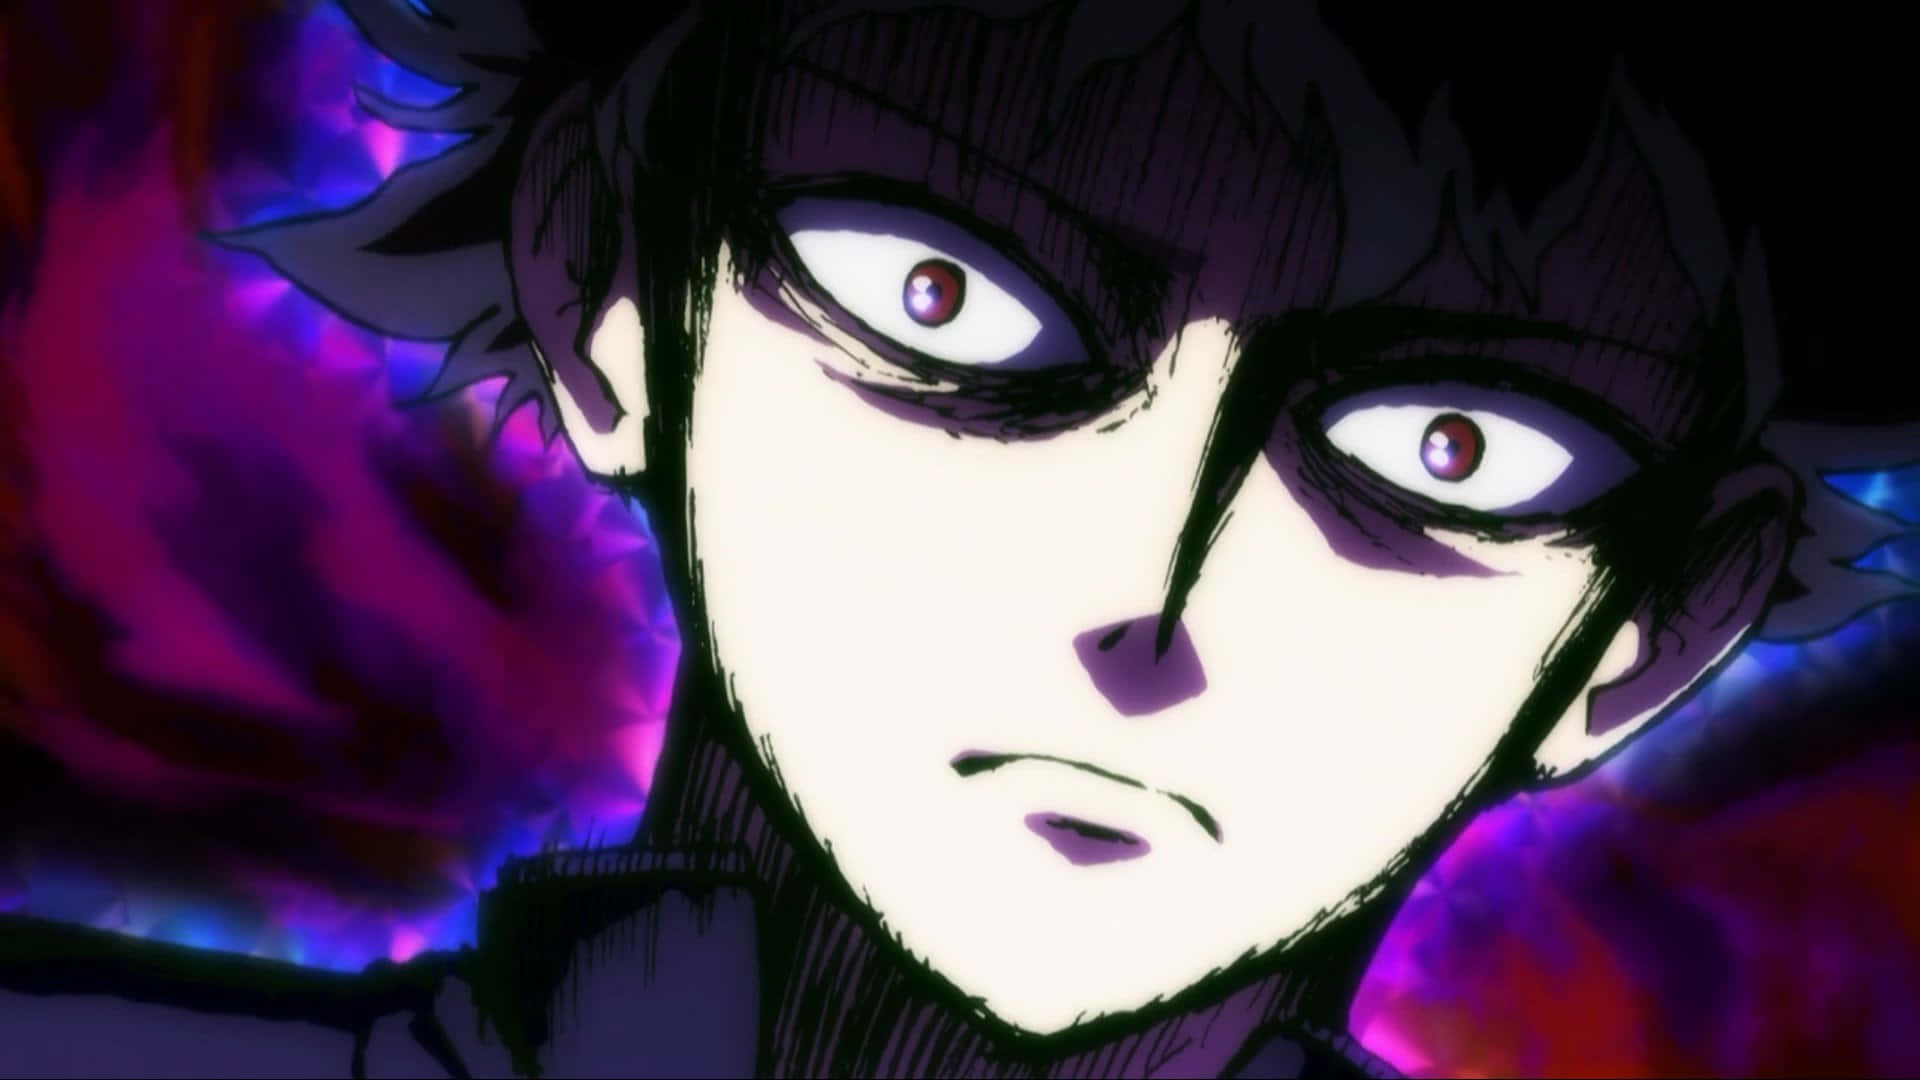 Kageyama Shigeo Aka Mob In Action, A Blend Of Surreal And Smashing Psychic Power!